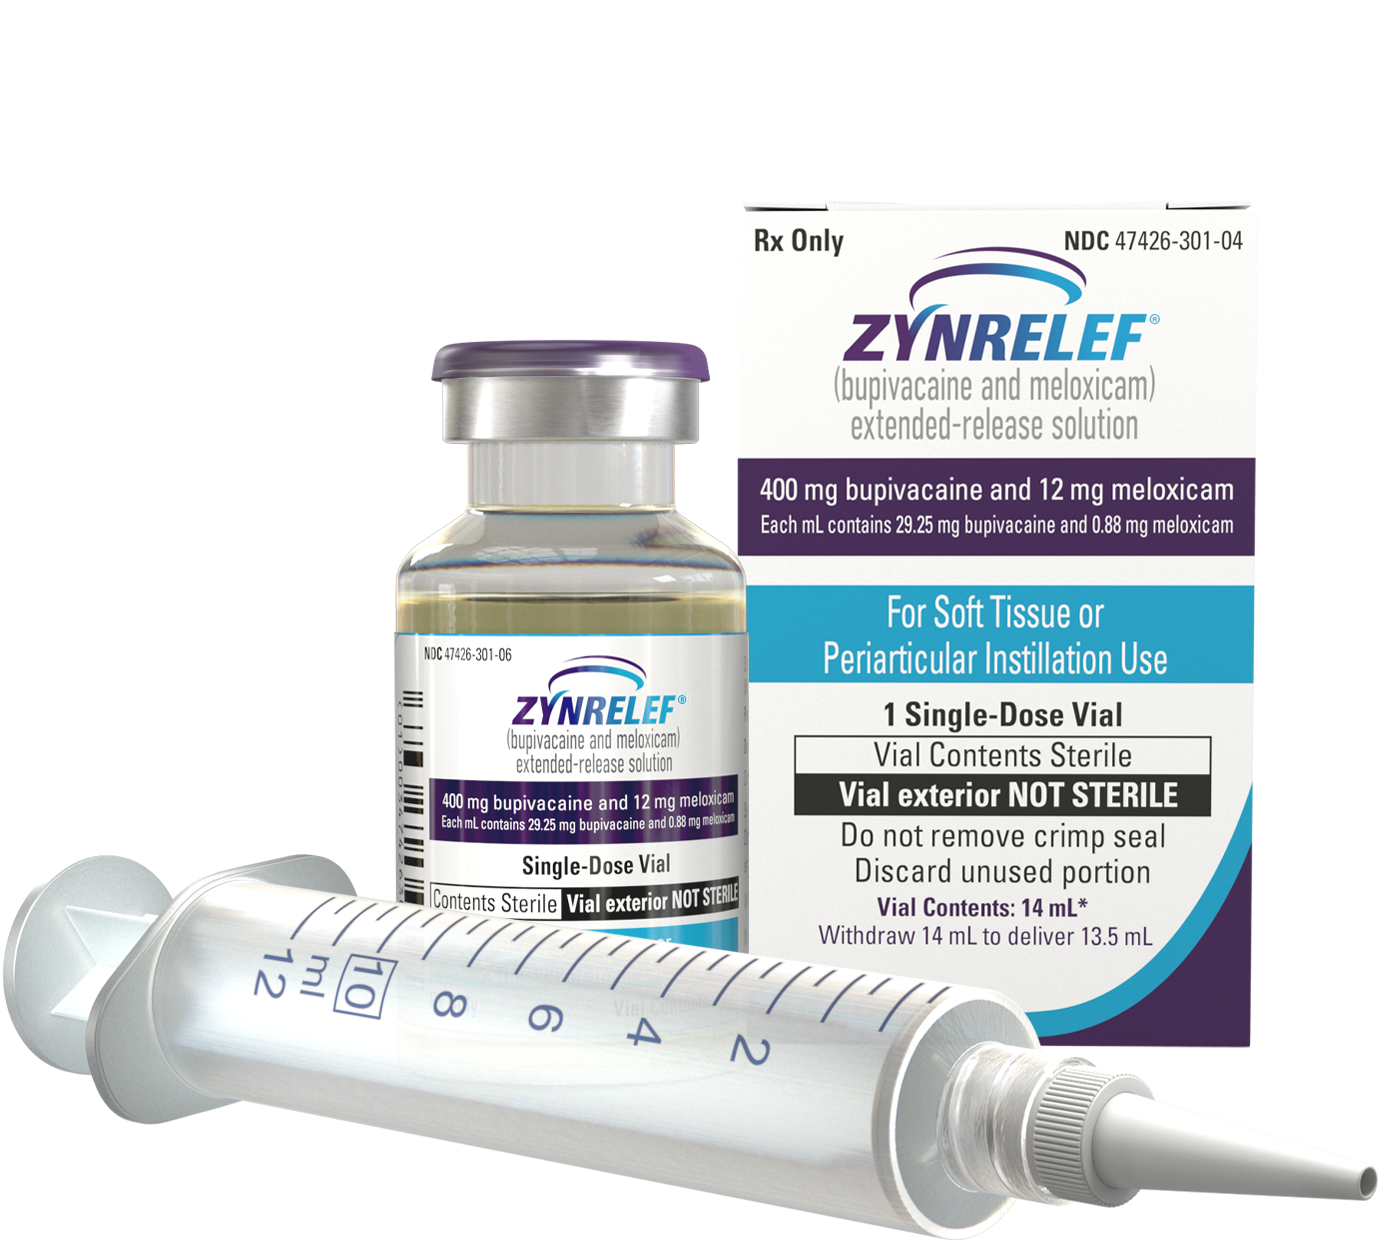 ZYNRELEF box with 14-mL vial next to it; needle-free applicator laying in front of vial and box.